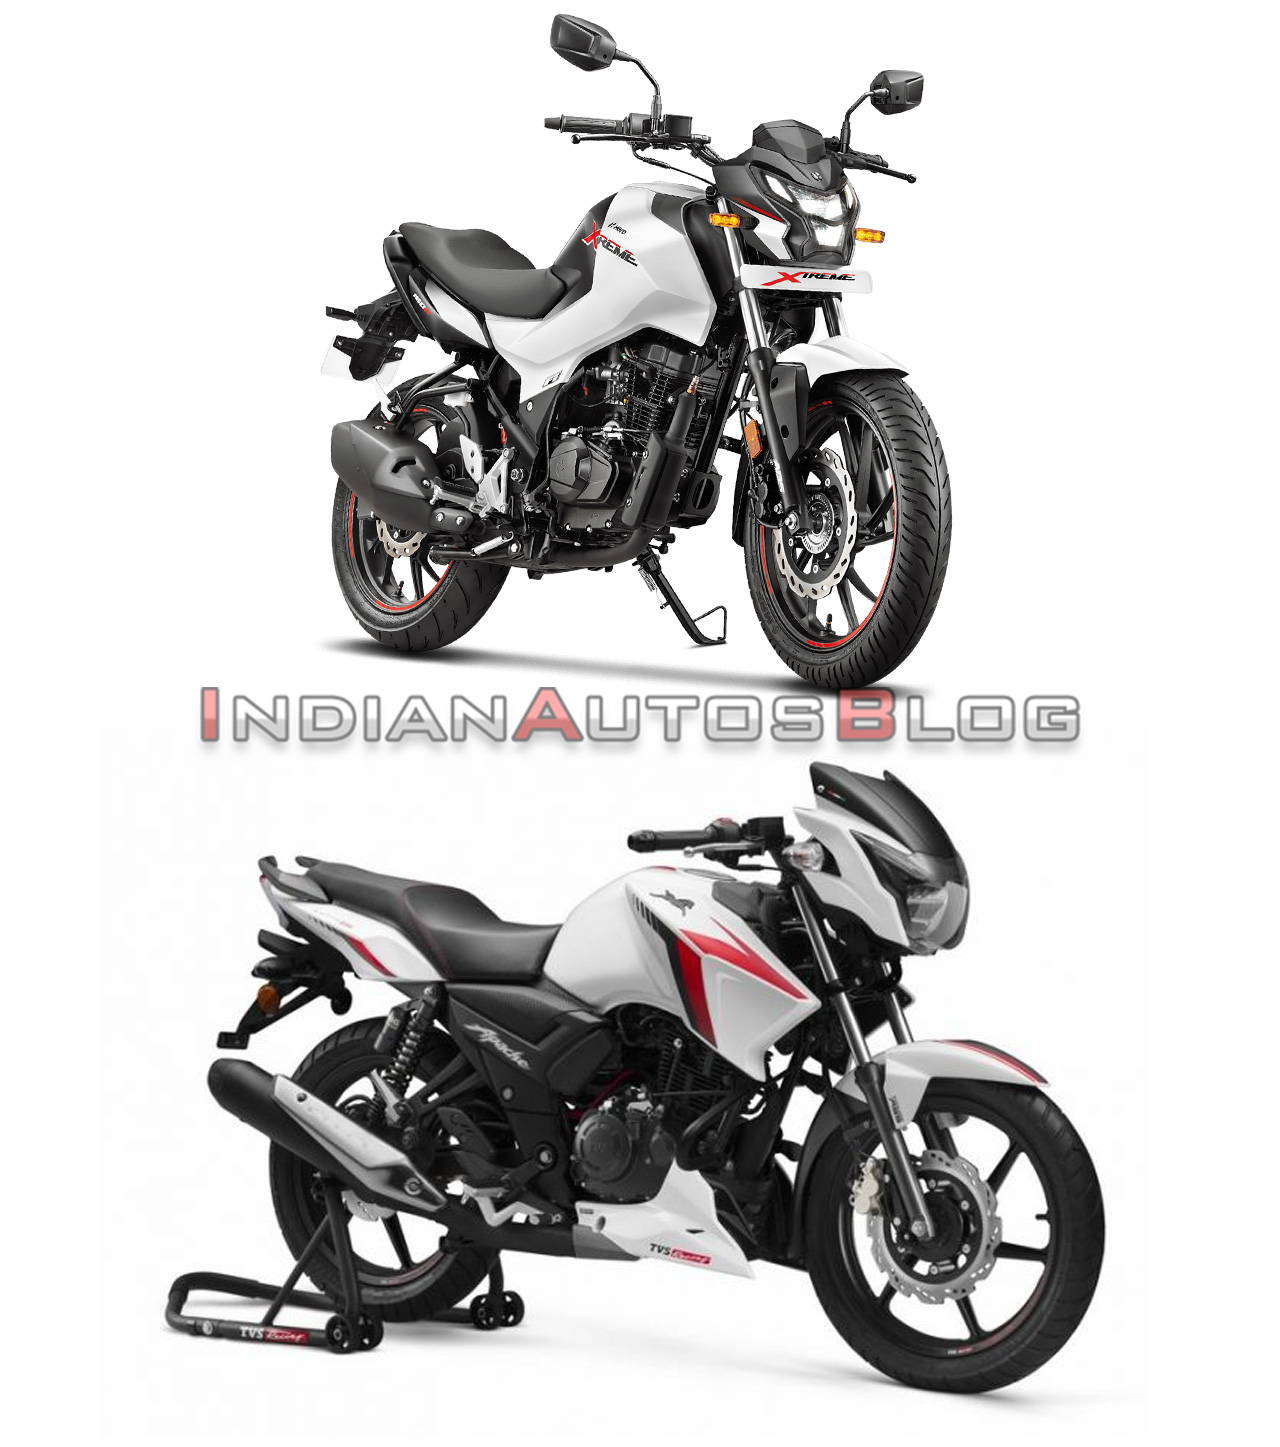 Xtreme 160r Vs Apache Rtr 160 Specs Features Compared